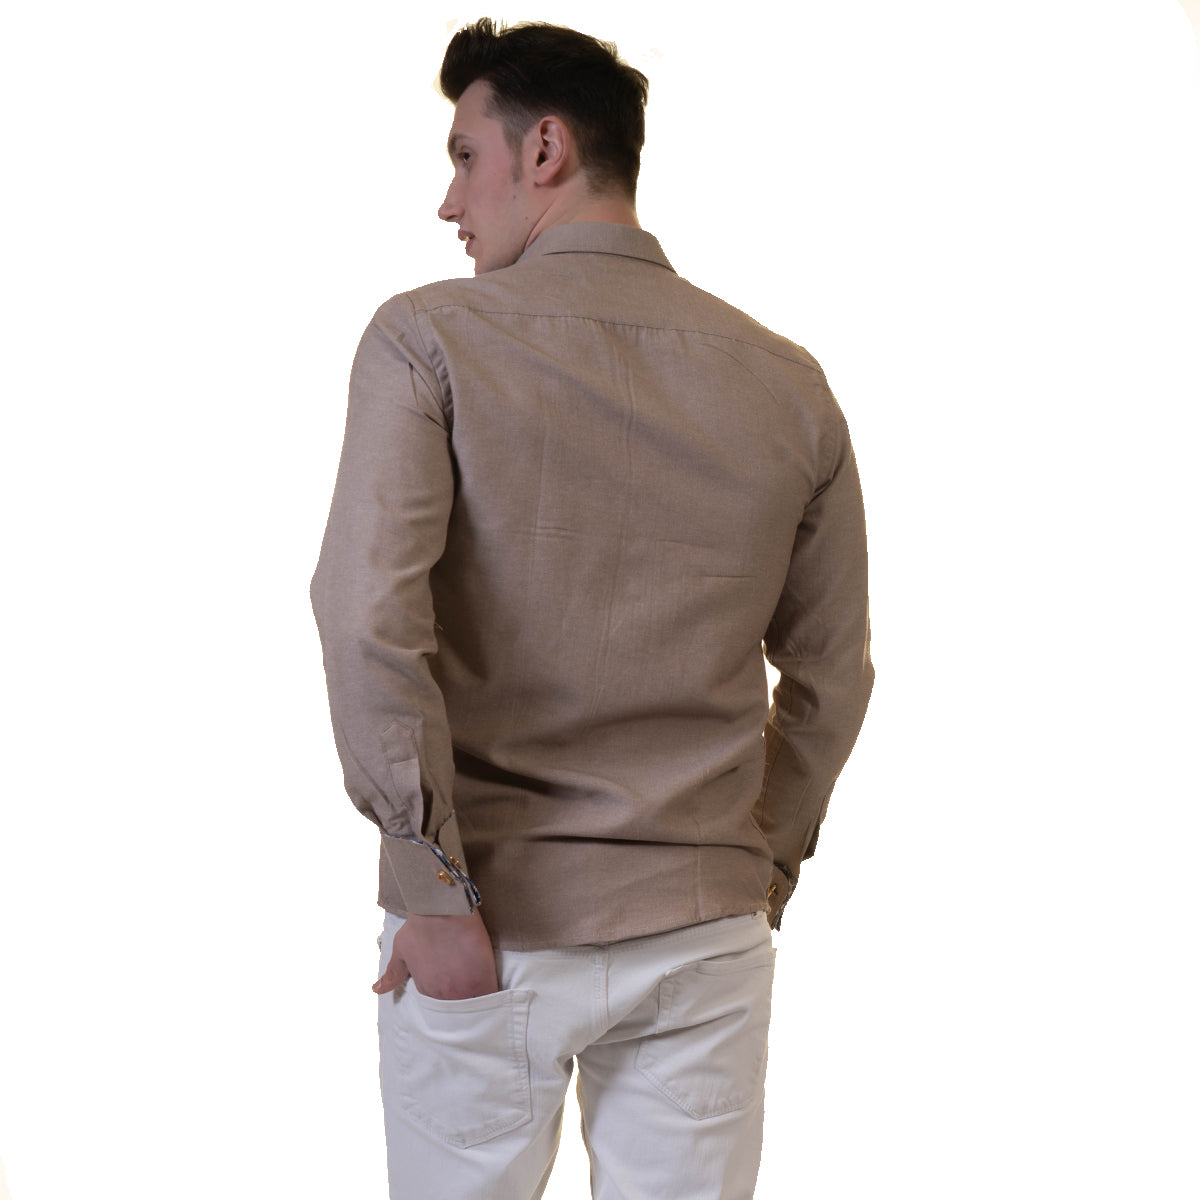 Brown White Mens Slim Fit French Cuff Shirts with Cufflink Holes - Casual and Formal